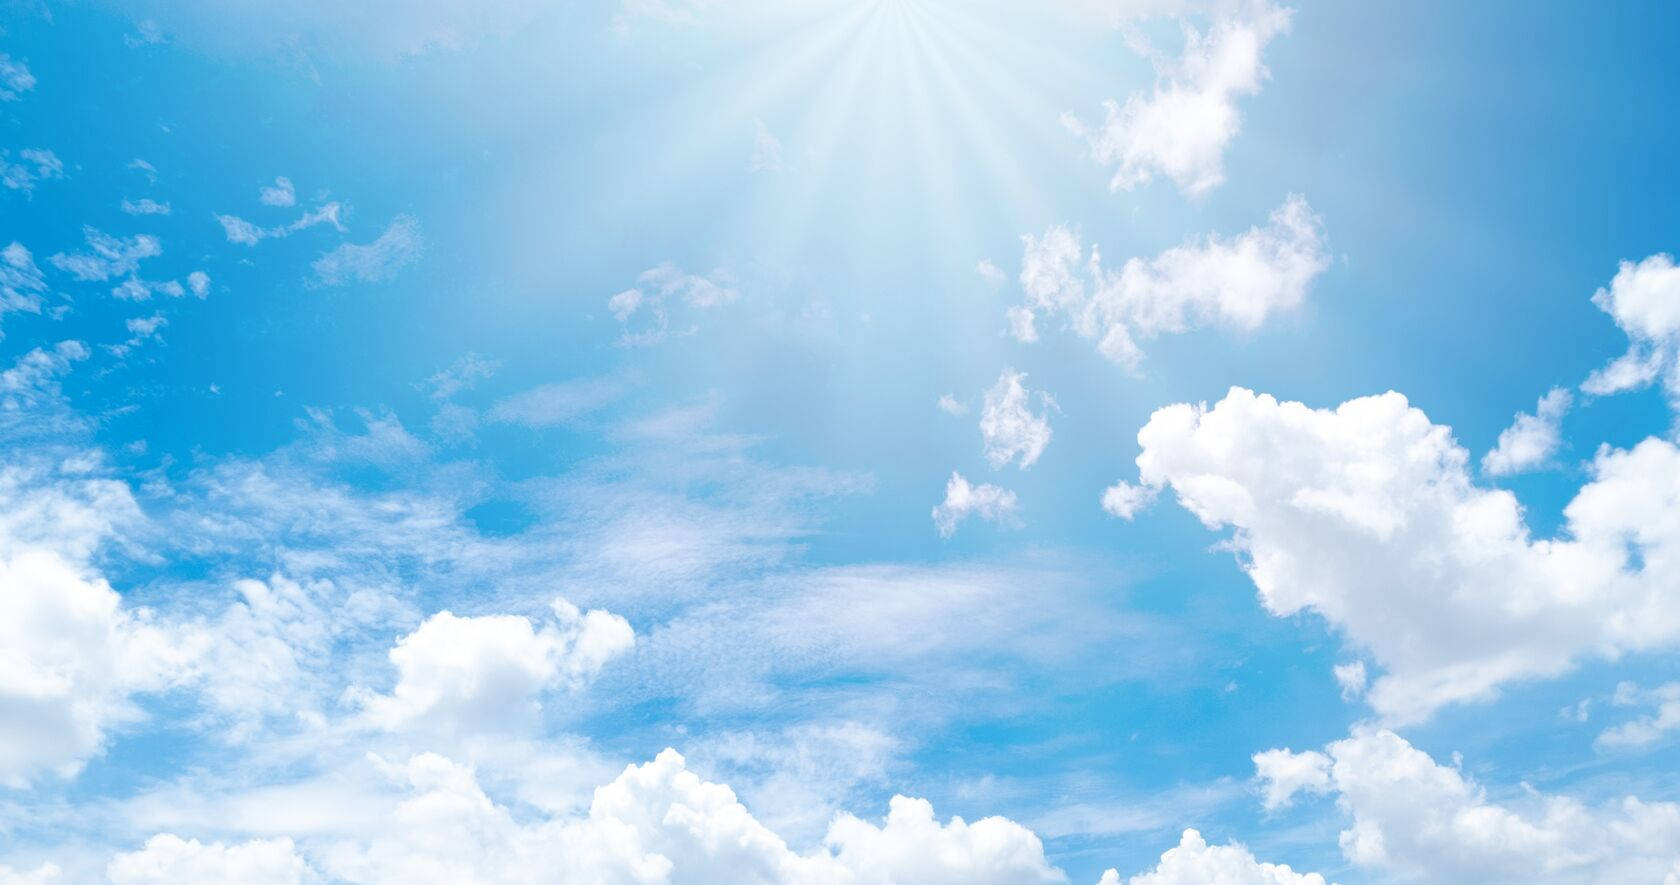 Top 999+ Funeral Clouds Wallpapers Full HD, 4K Free to Use